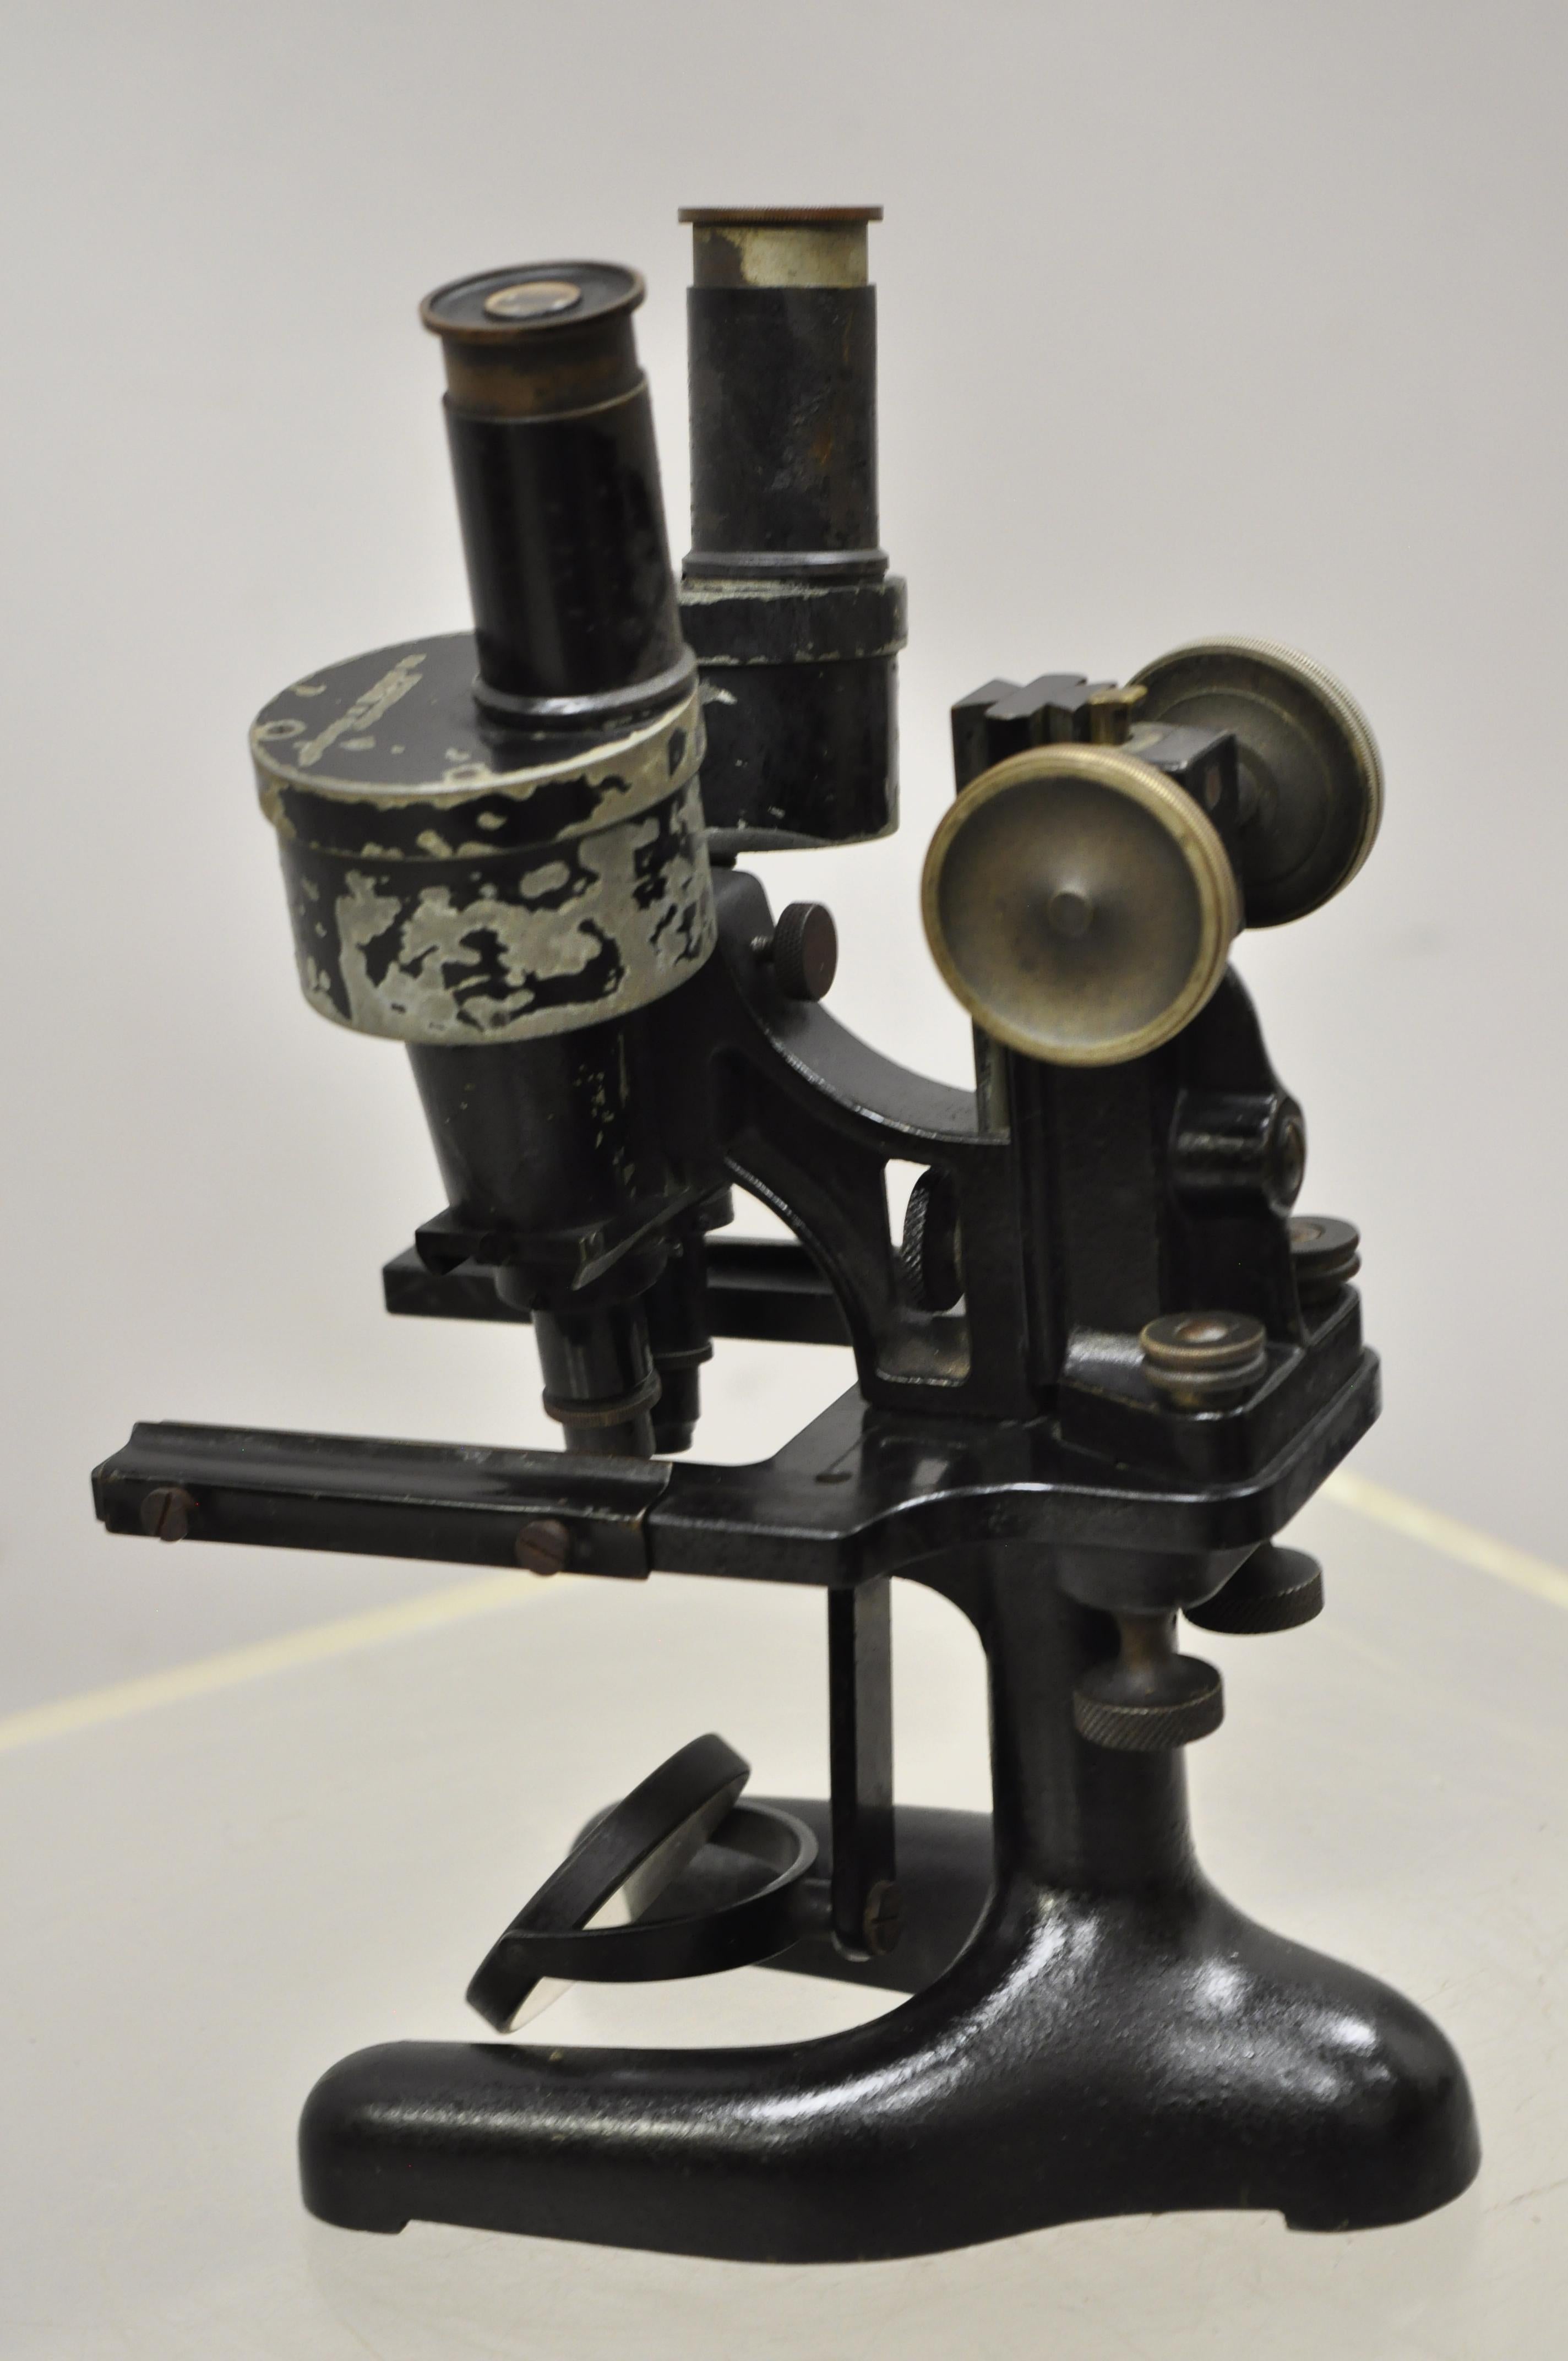 Antique Bausch-Lomb Arthur G. Thomas Microscope in case with extras. Item features original wood case, 2 extra viewers, 2 metal plates, metal handle, original stamp, no key, but unlocked, circa early 20th century. Measurements: Case: 13.75